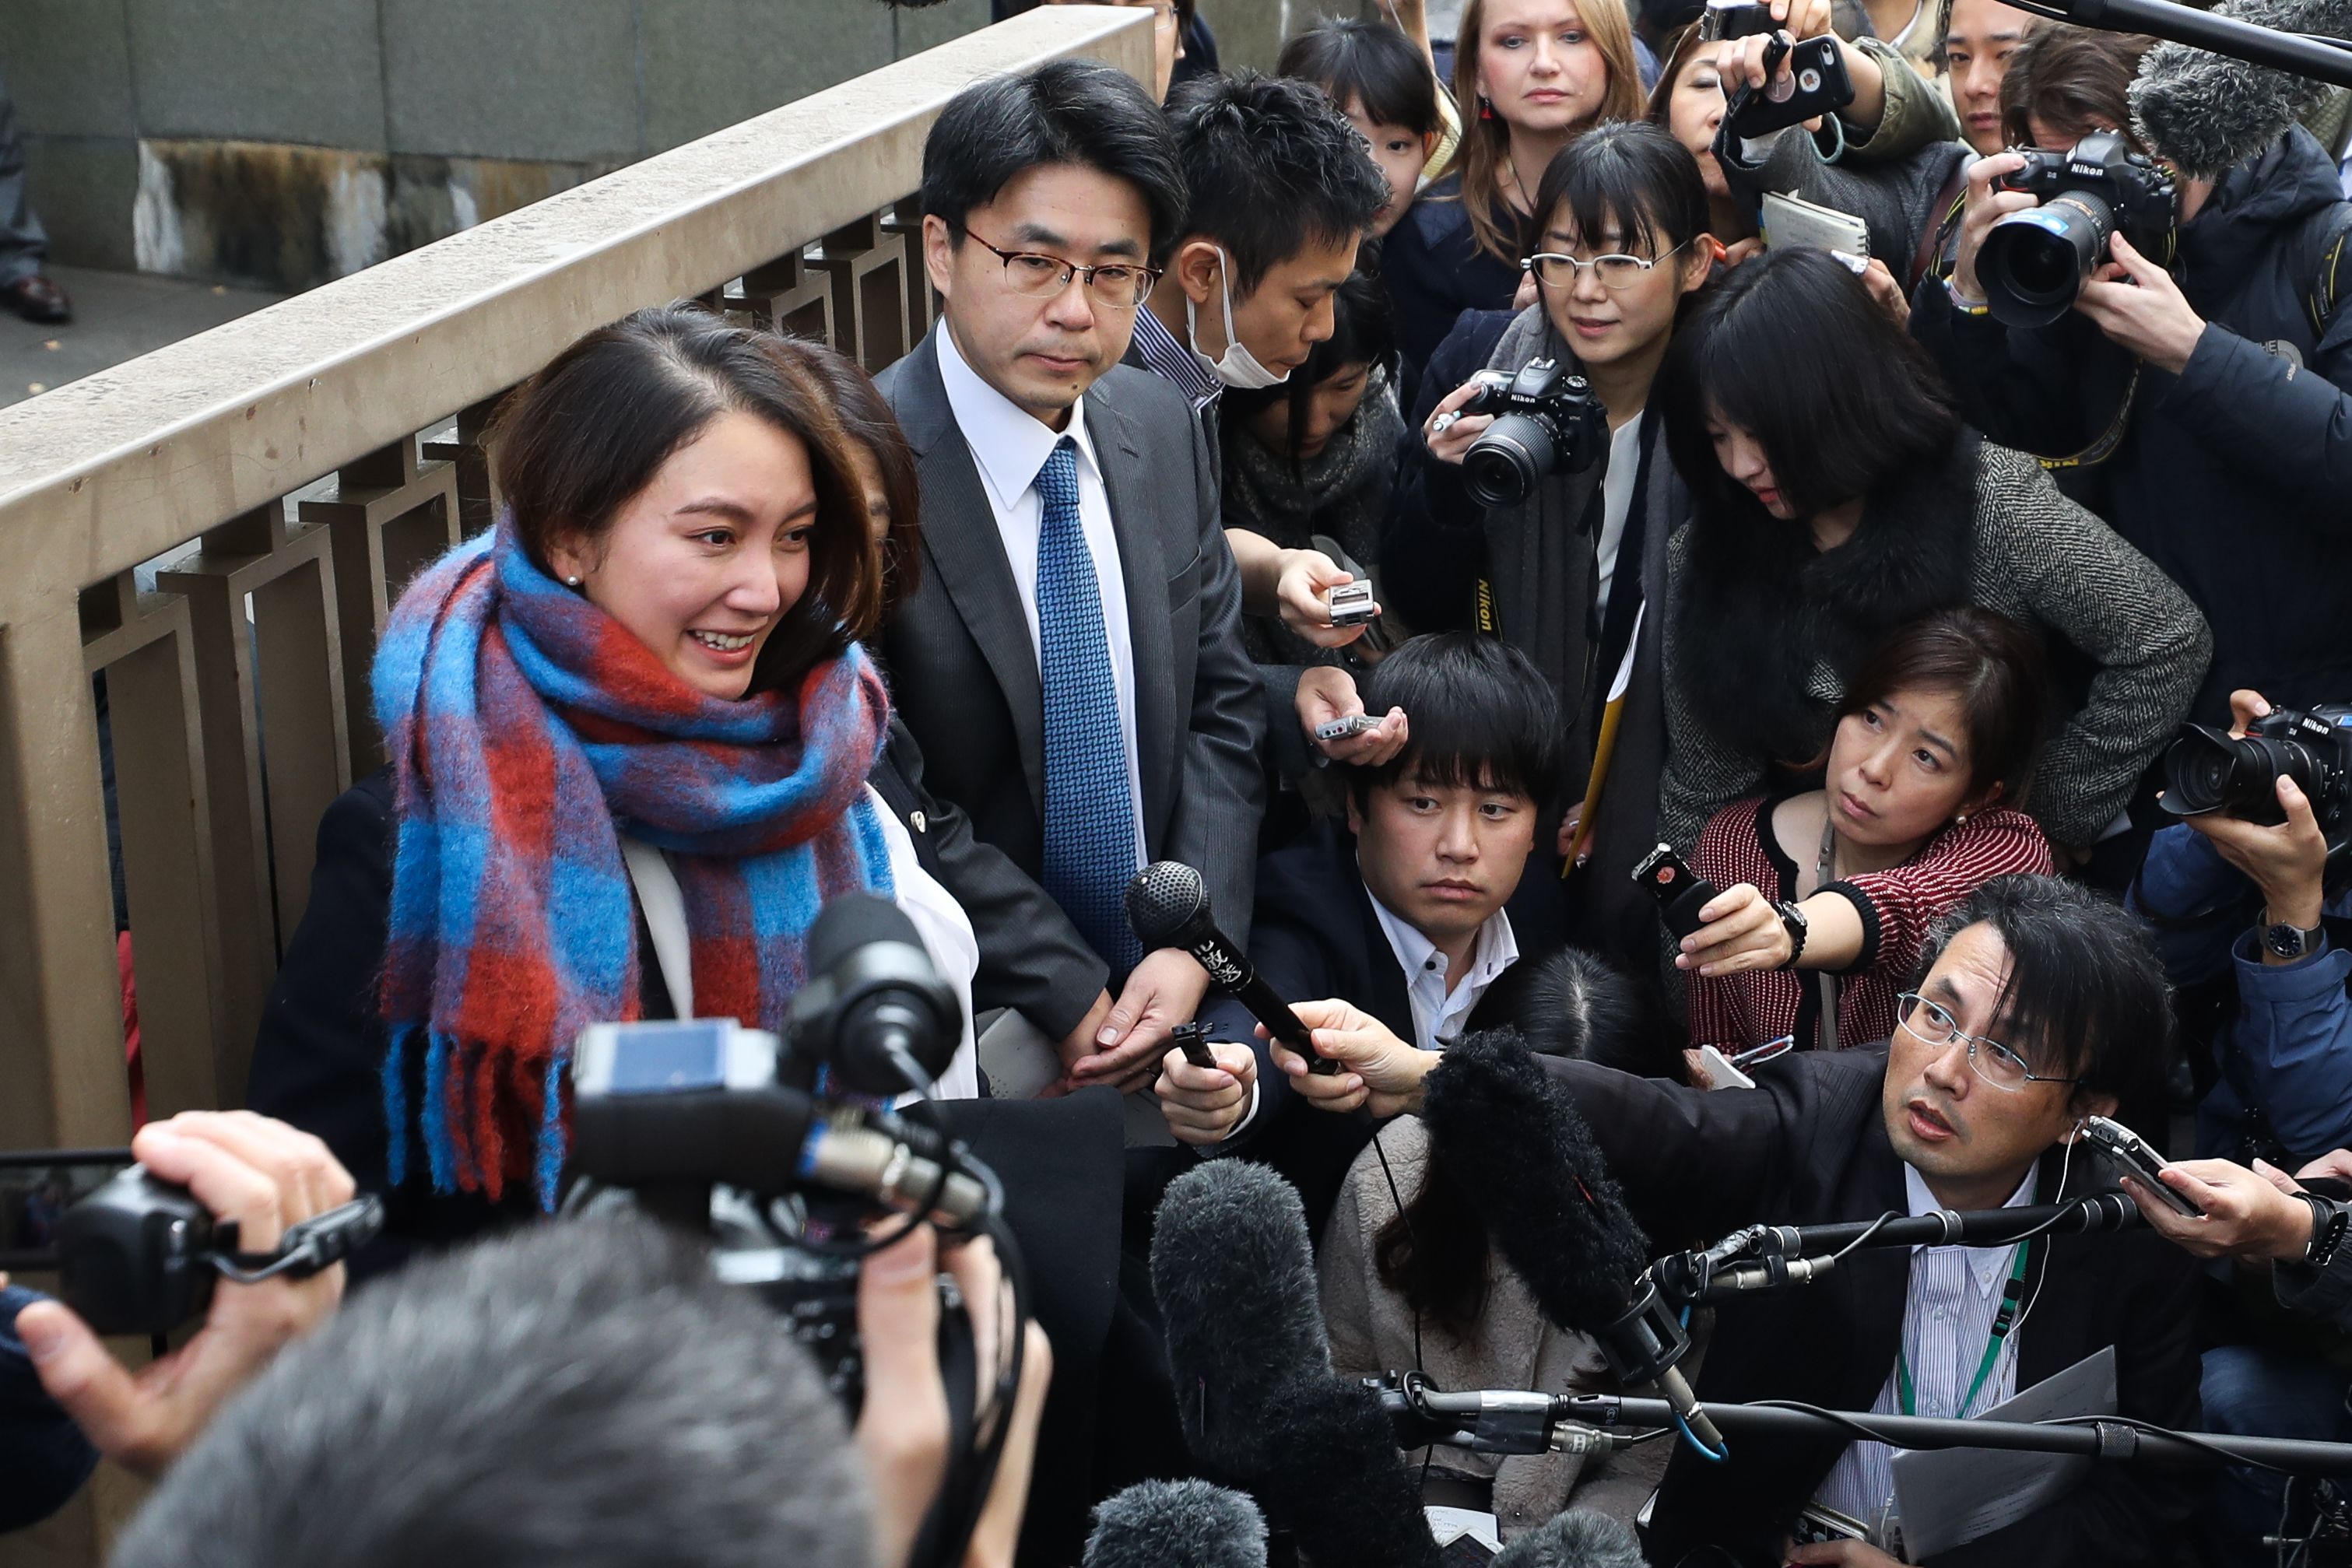 Japanese Son Forced Mom Rep Sex Hd - Shiori Ito won civil case against her alleged rapist. But Japan's rape laws  need overhaul, campaigners say | CNN